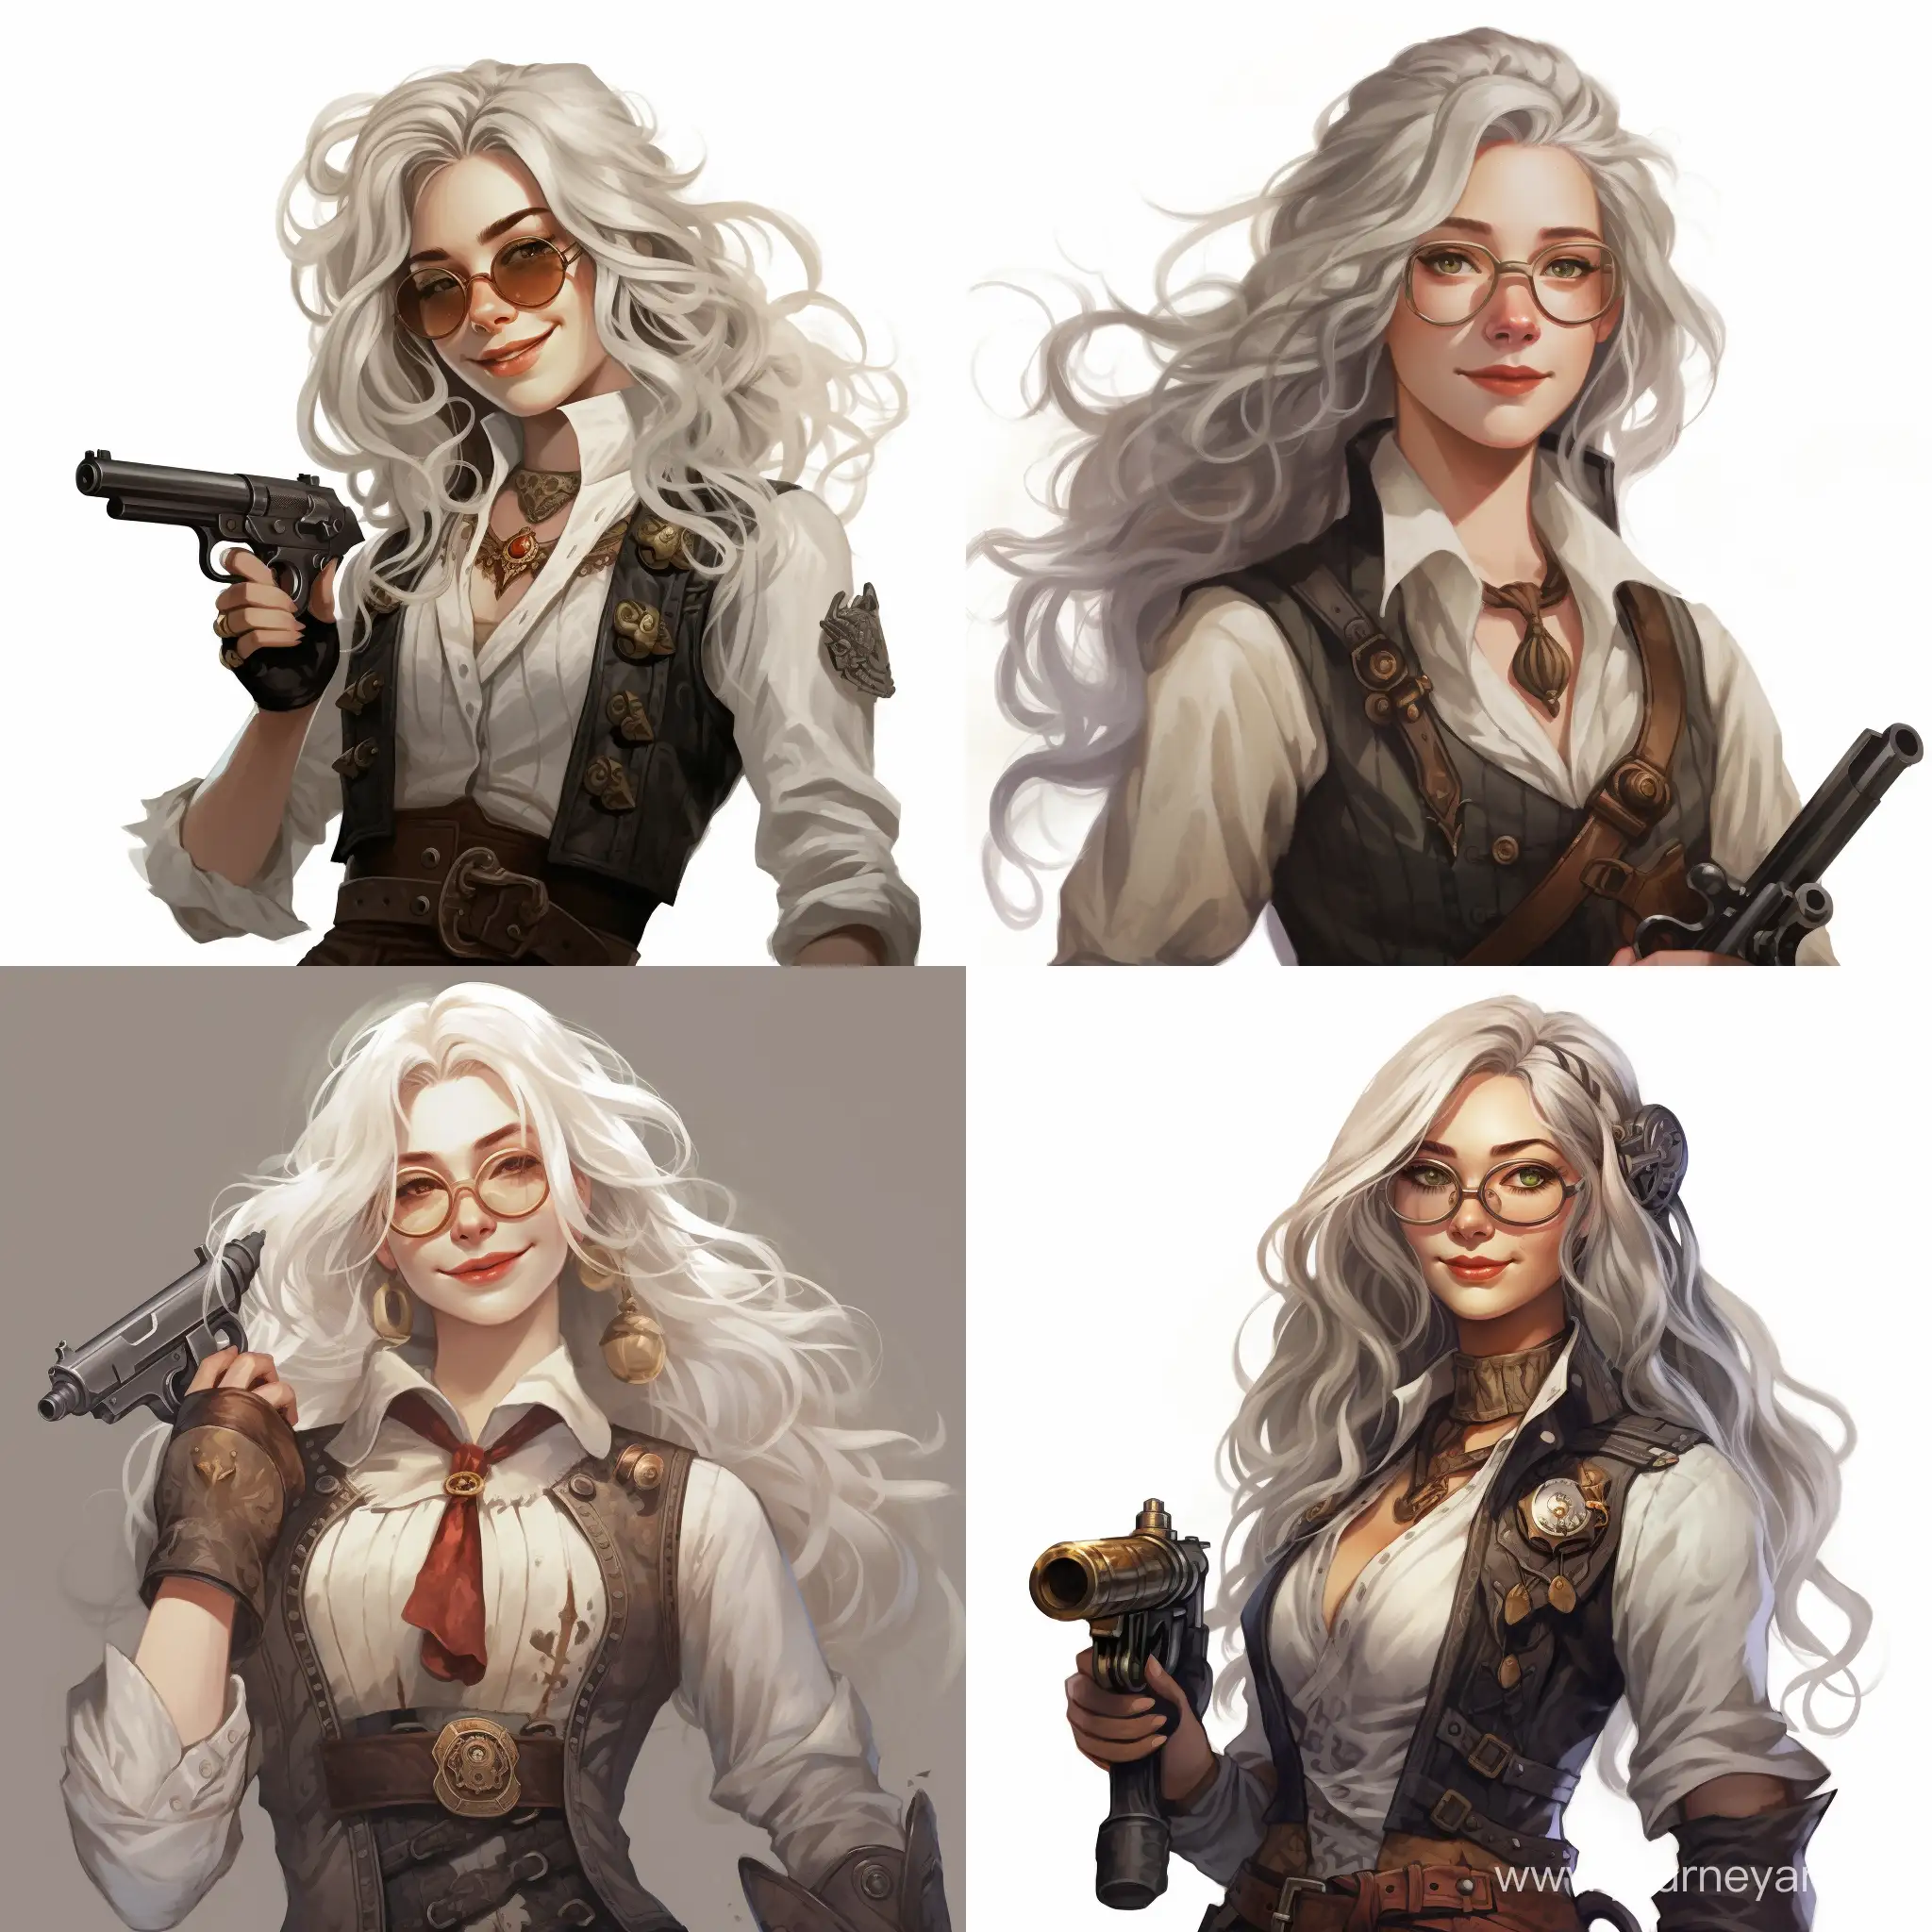 Steampunk-Woman-with-Revolver-Smiling-20YearOld-in-Round-Glasses